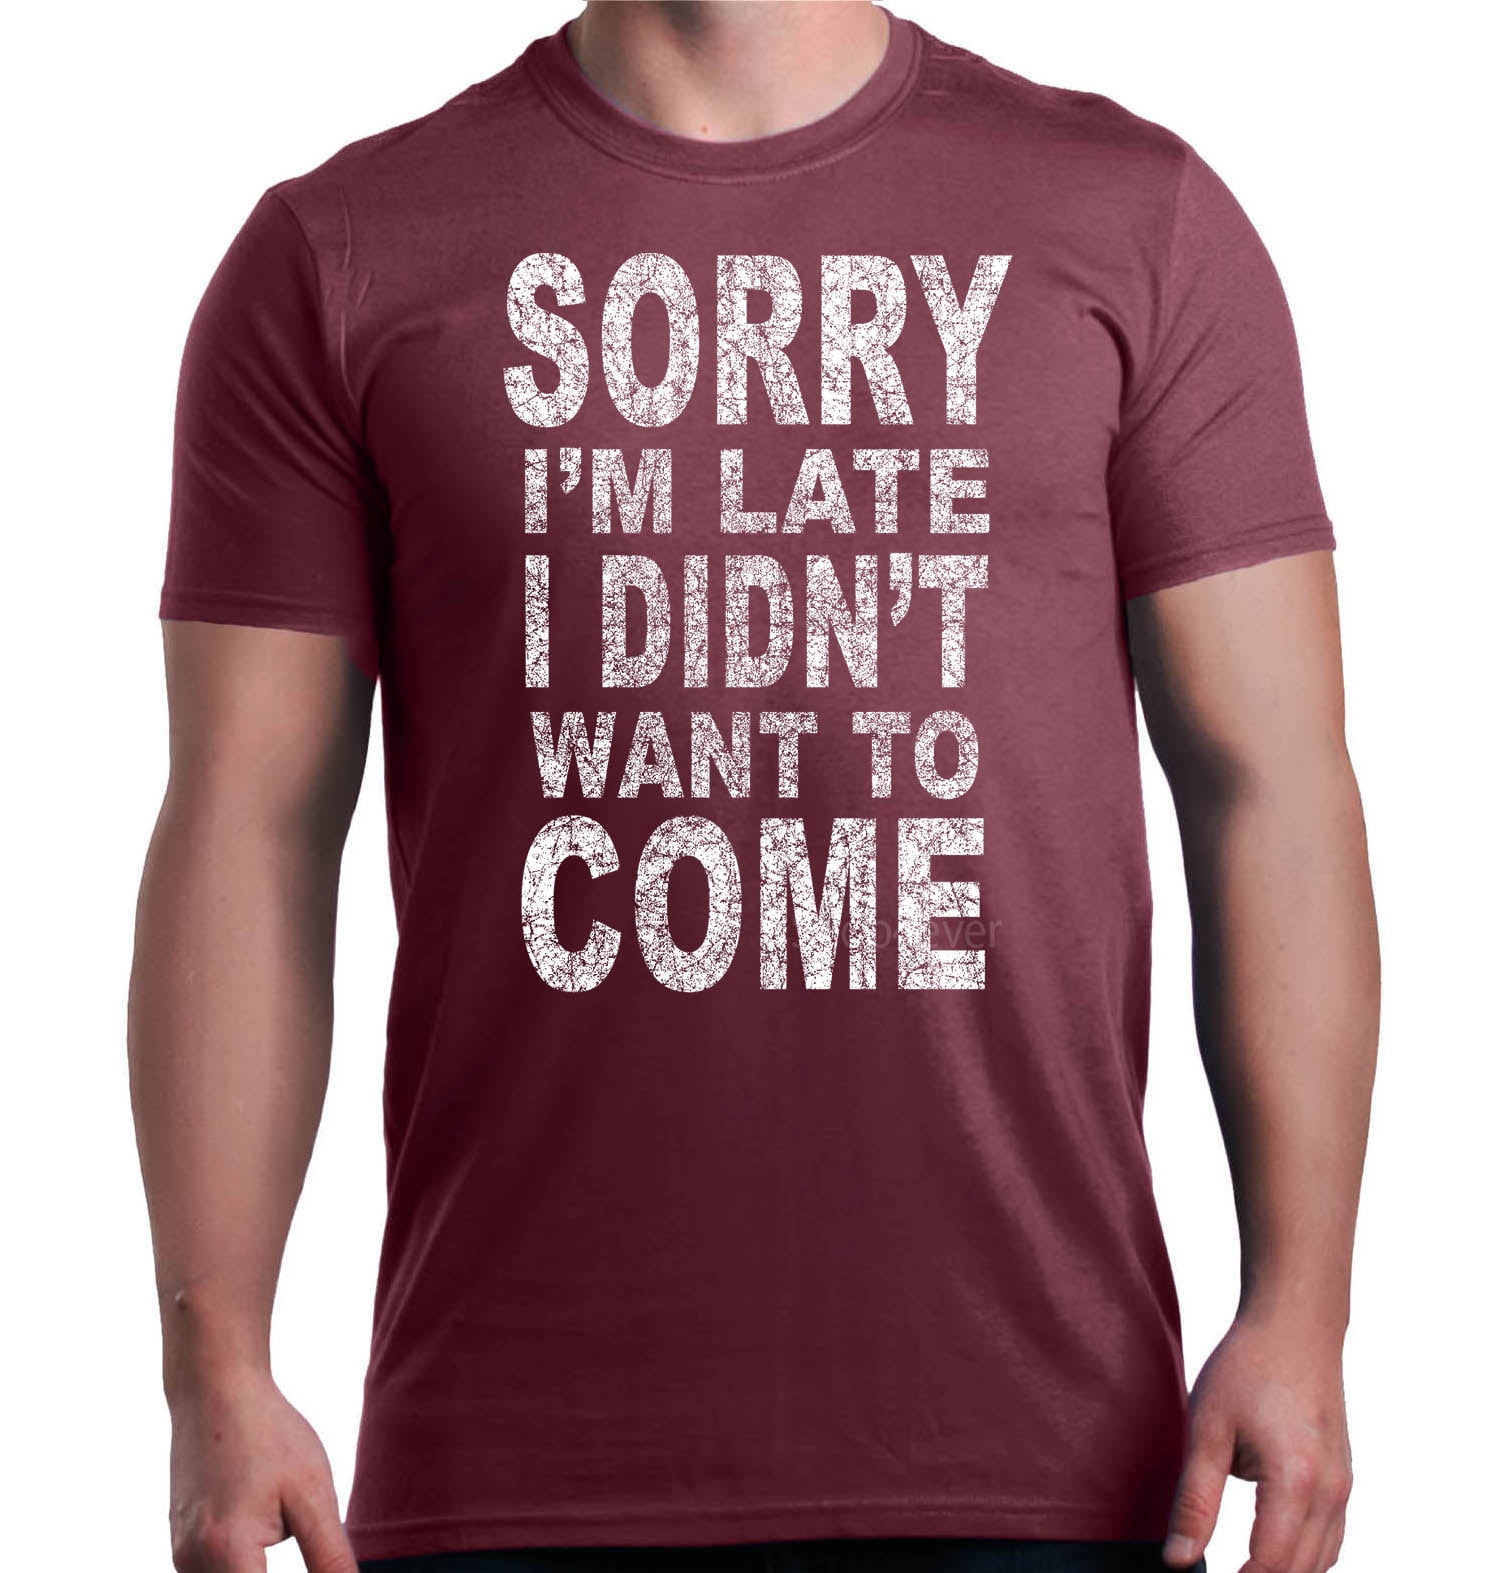 I'm Late I Didn't Want to Come Humor Sarcastic T-shirts Unisex Graphic Tee Tops 